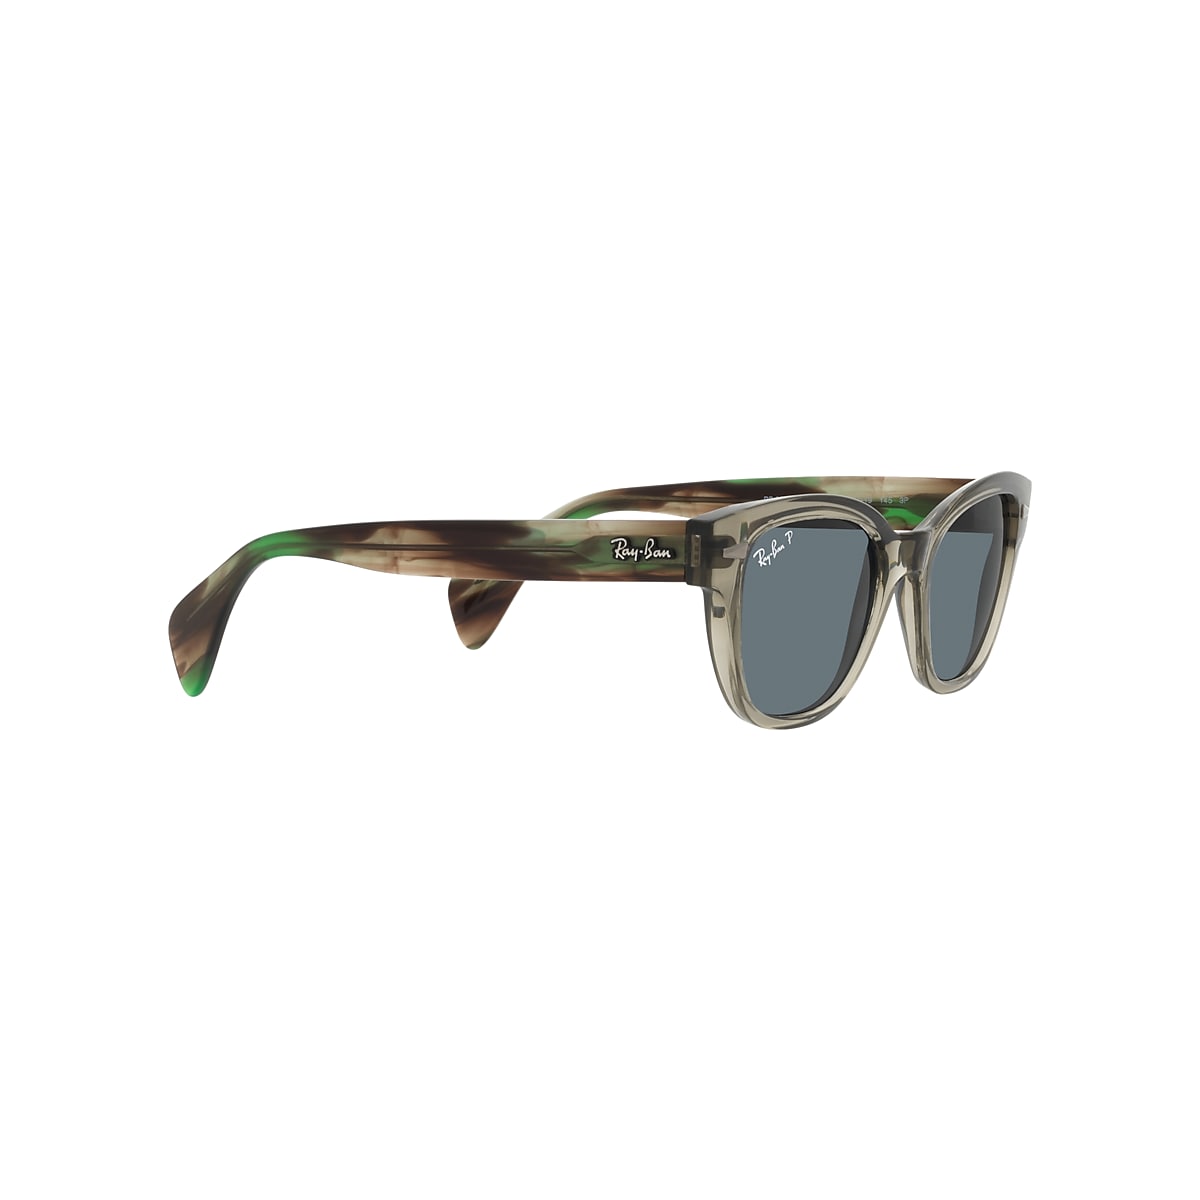 RB0880S Sunglasses in Transparent Green and Blue - Ray-Ban